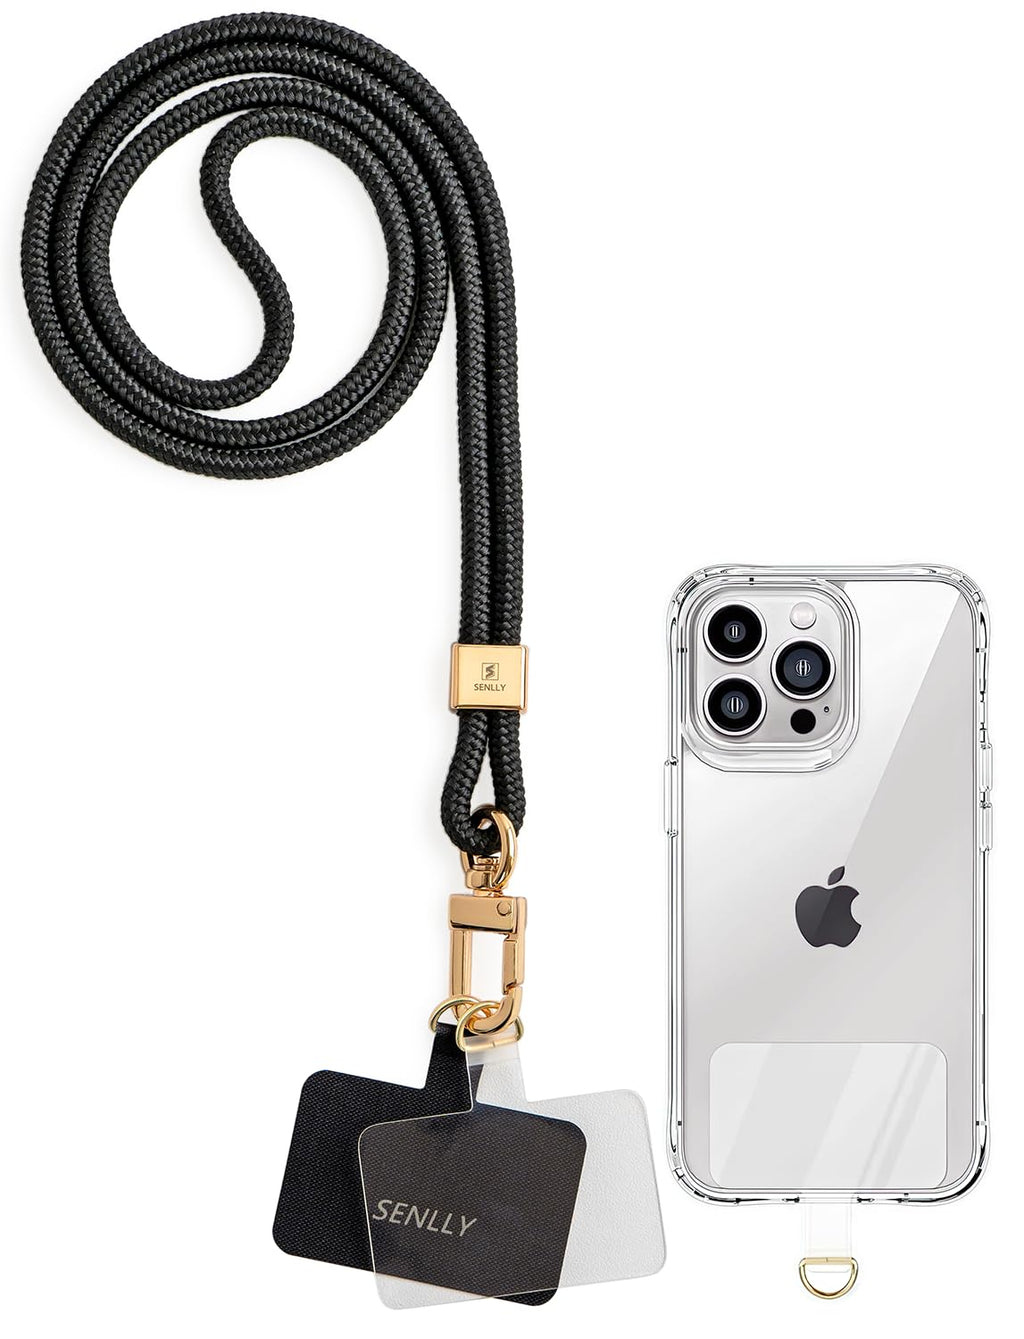 SENLLY Phone Lanyard with Ultra Thin Patch, Original Minimalist Design Neck Strap Compatible All Smartphone 101 Black